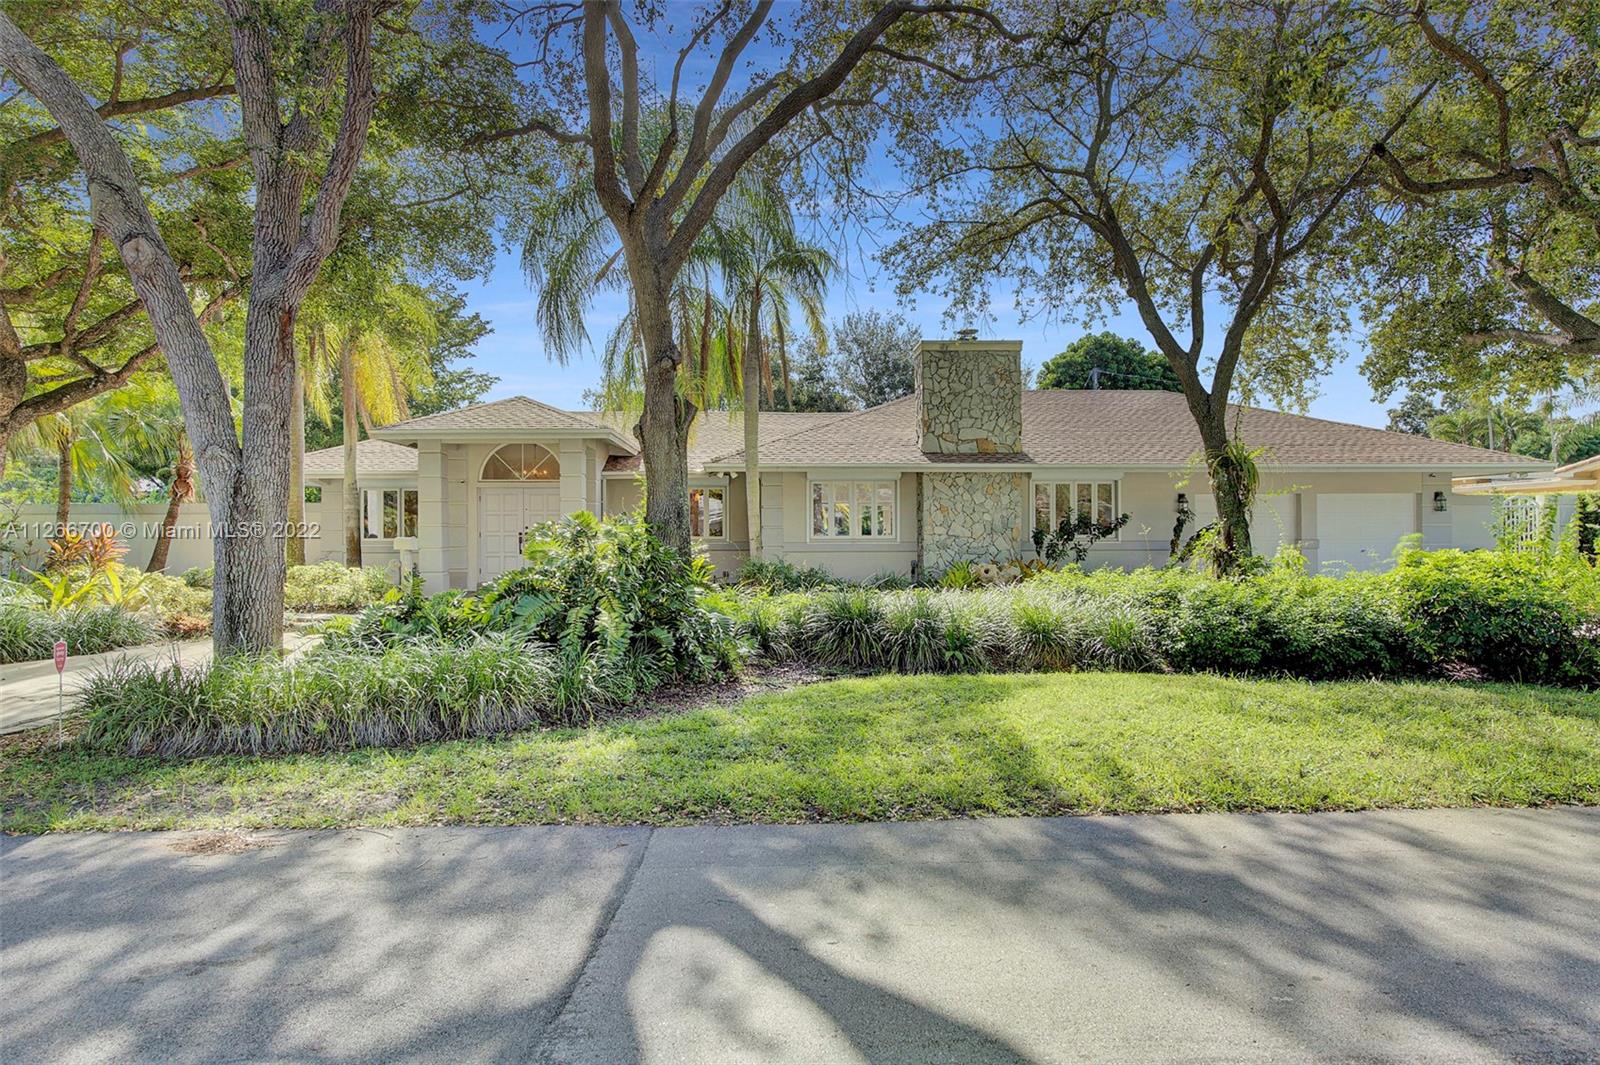 This beautiful Pinecrest home is a must see!!  It features a great floor plan with a formal foyer entry, spacious living and dining rooms, and volume ceilings.  A stunning new kitchen with a 10 ft long island and a breakfast area opens to the family room and french doors that lead to the pool, lush backyard, and a covered terrace - perfect for entertaining and lounging!! This fabulous home also includes an office, a laundry room, full 2 car garage, and a circular driveway.  Enjoy living close to excellent public and private schools, restaurants, shops, and parks.  Rent includes pool and garden maintenance.